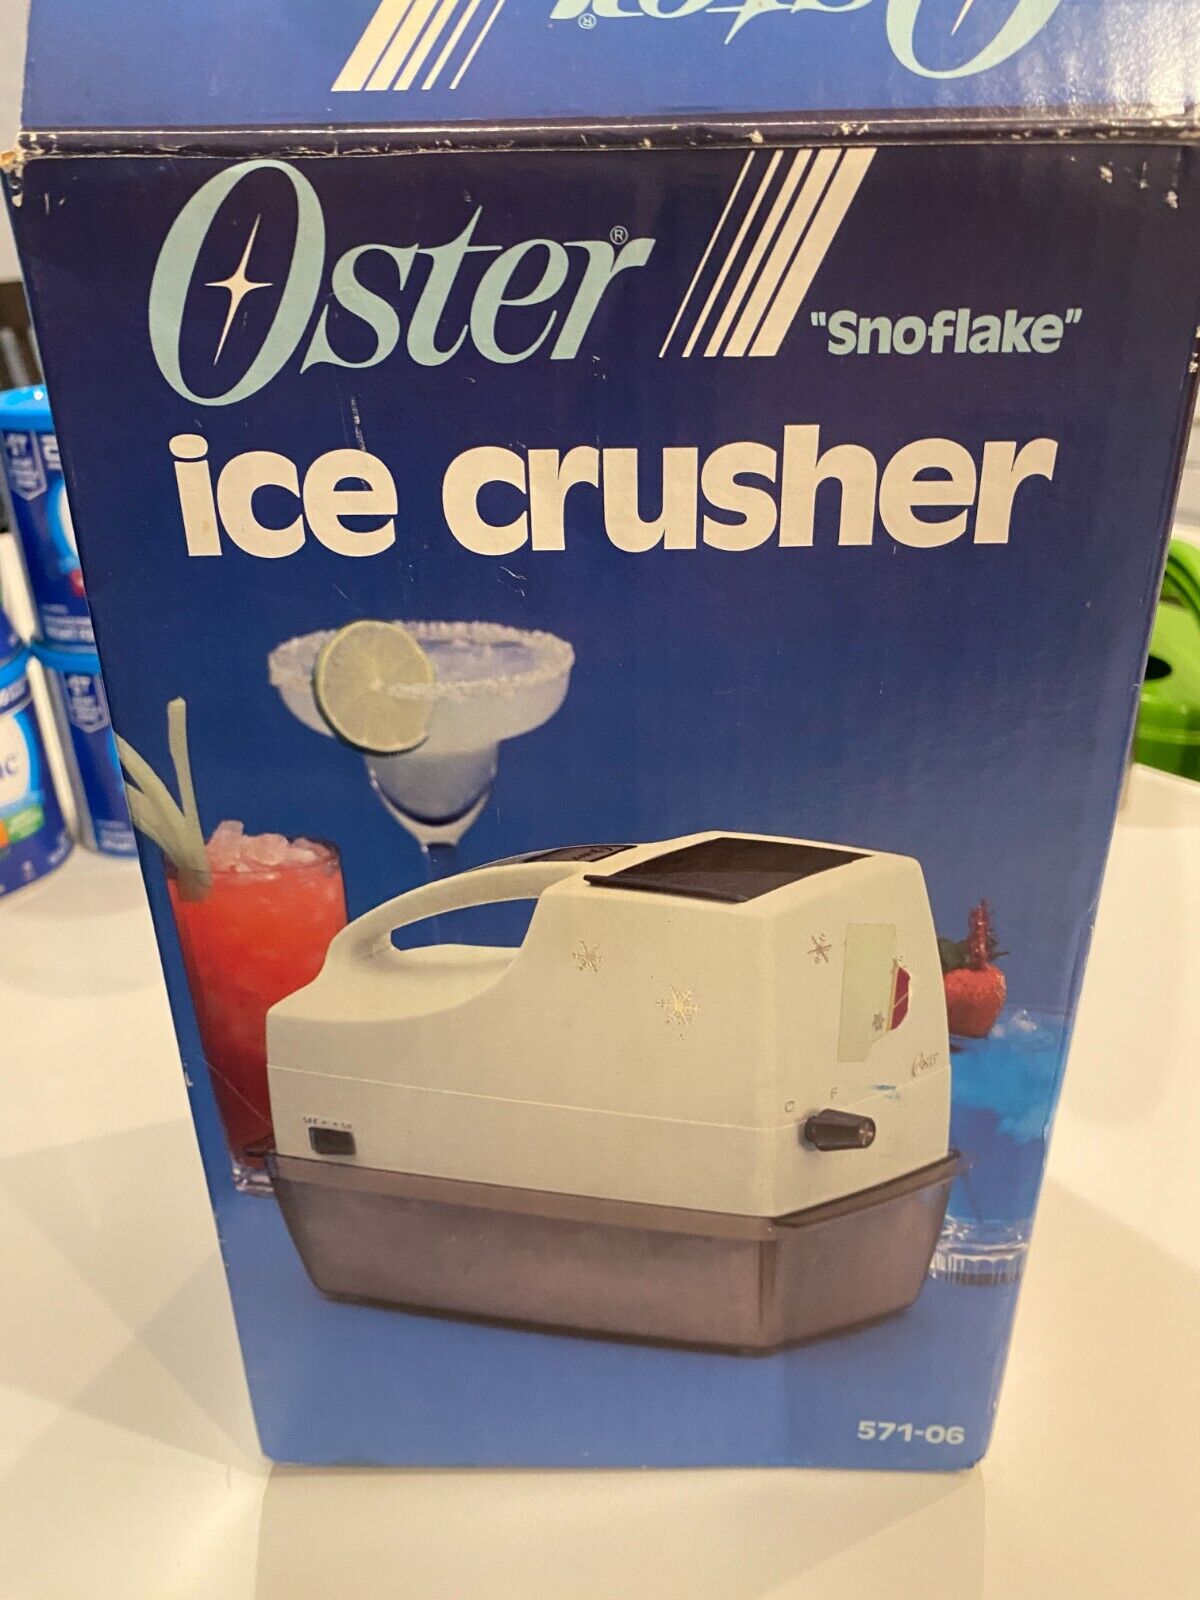 VINTAGE 1985 OSTER Snoflake Portable Electric Ice CUBE CRUSHER 571-06 USED ONCE